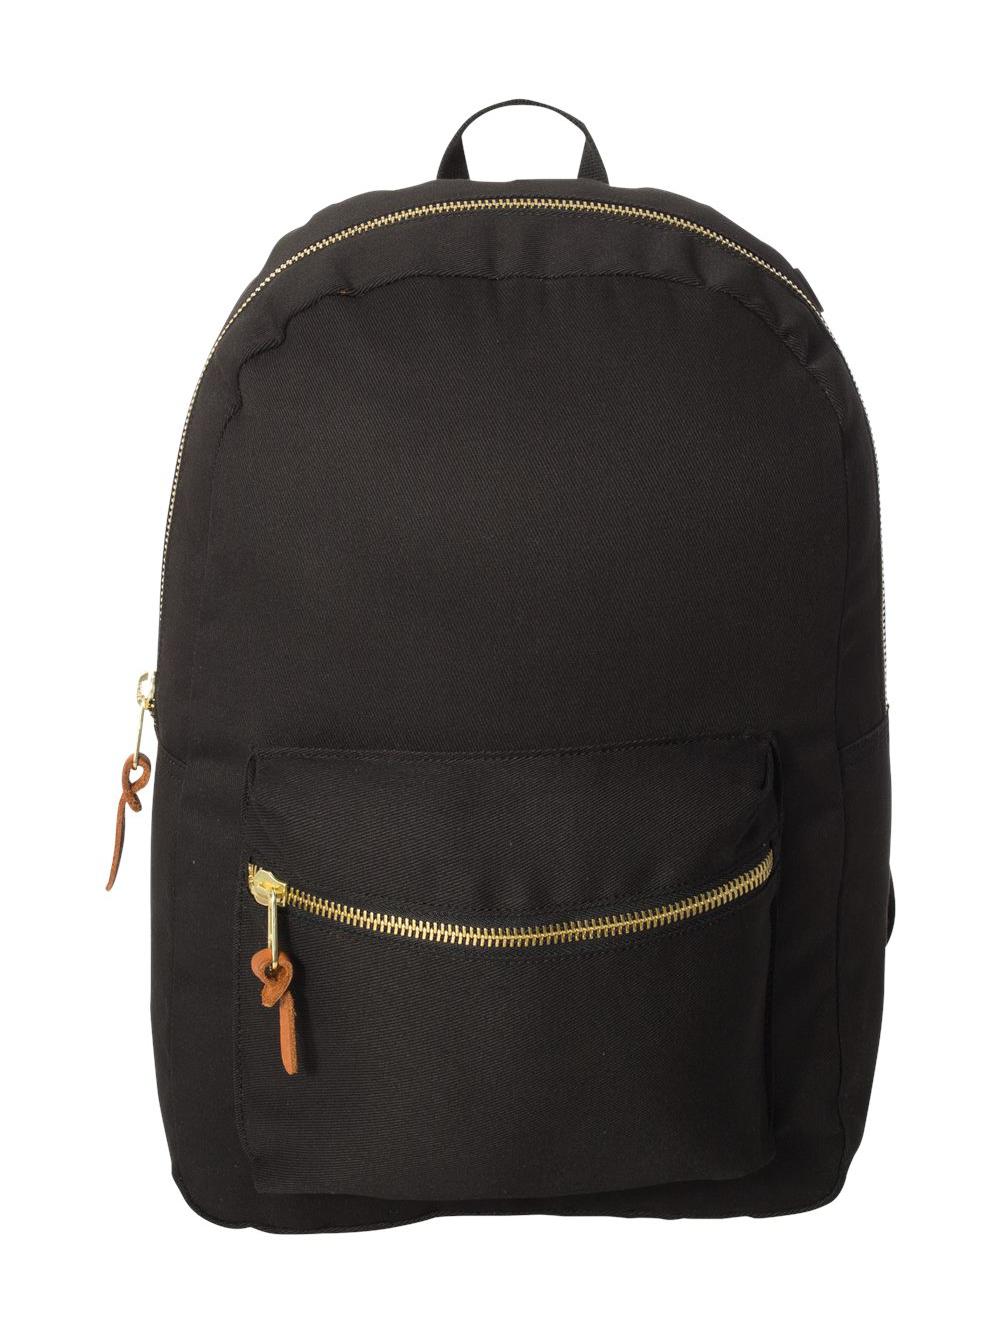 Heritage Canvas Backpack LB3101 - image 2 of 3